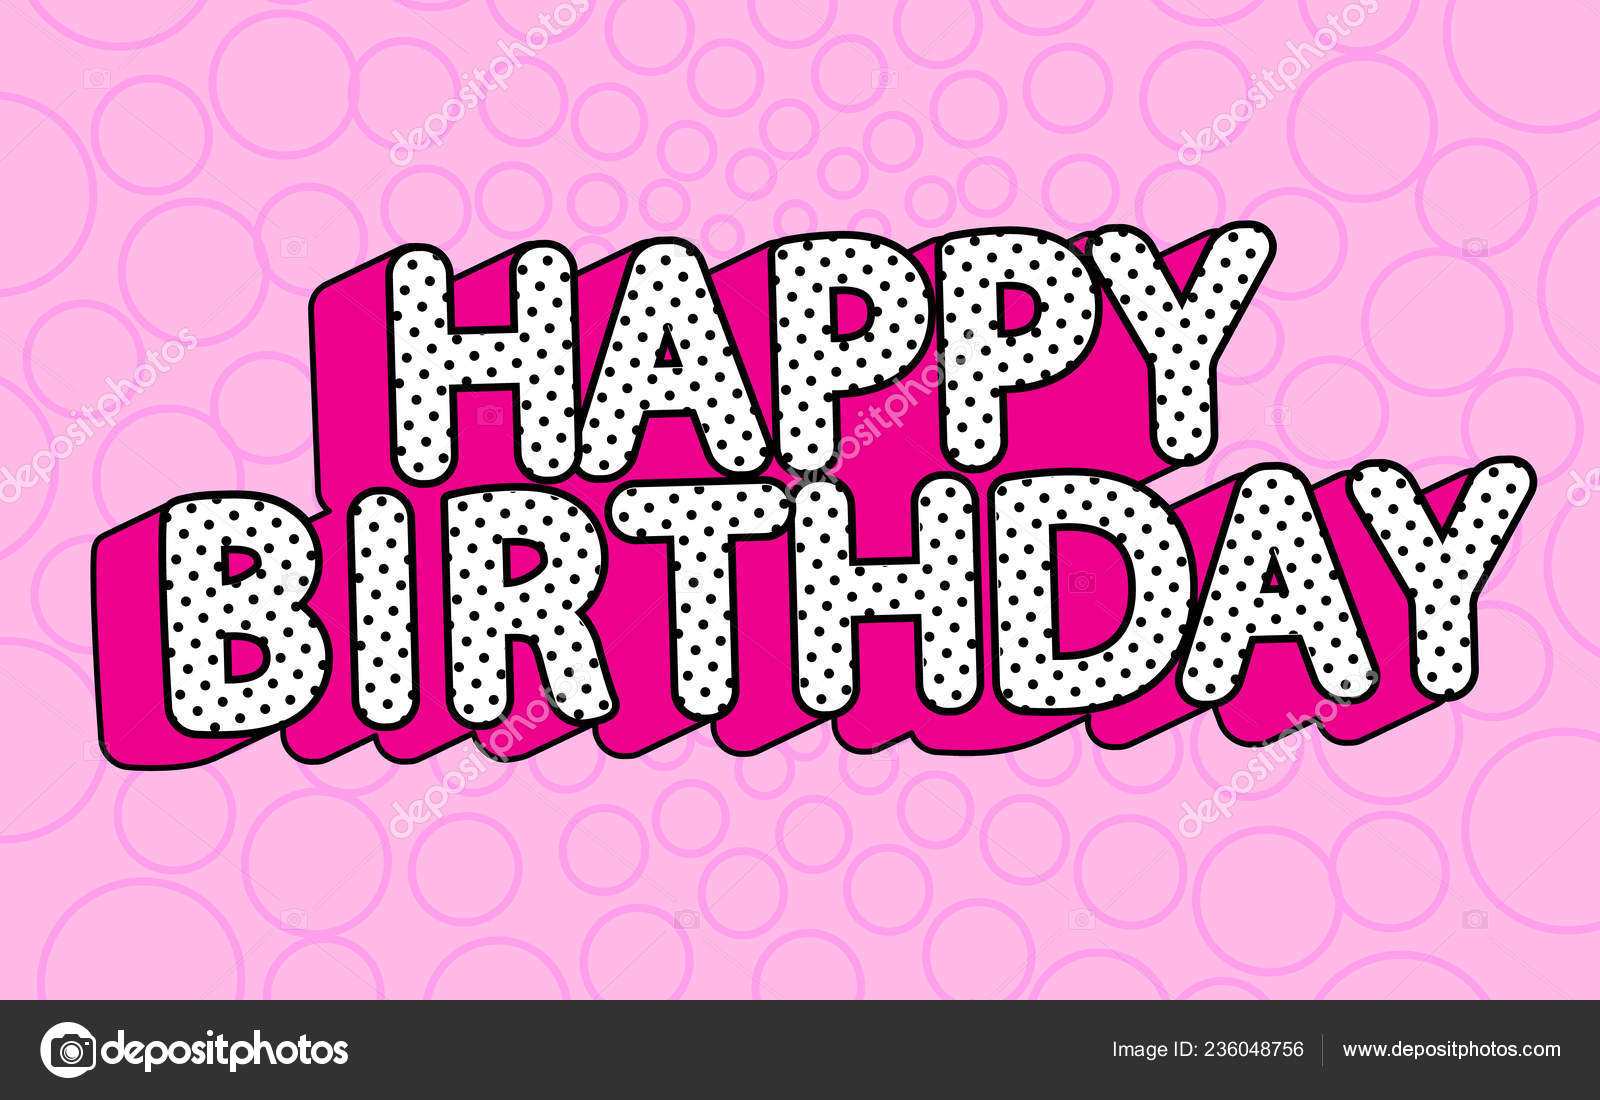 Pictures Black And White Lol Doll Happy Birthday Banner Text Hot Pink Shadow Themed Party Lol Stock Vector C Alenaspl